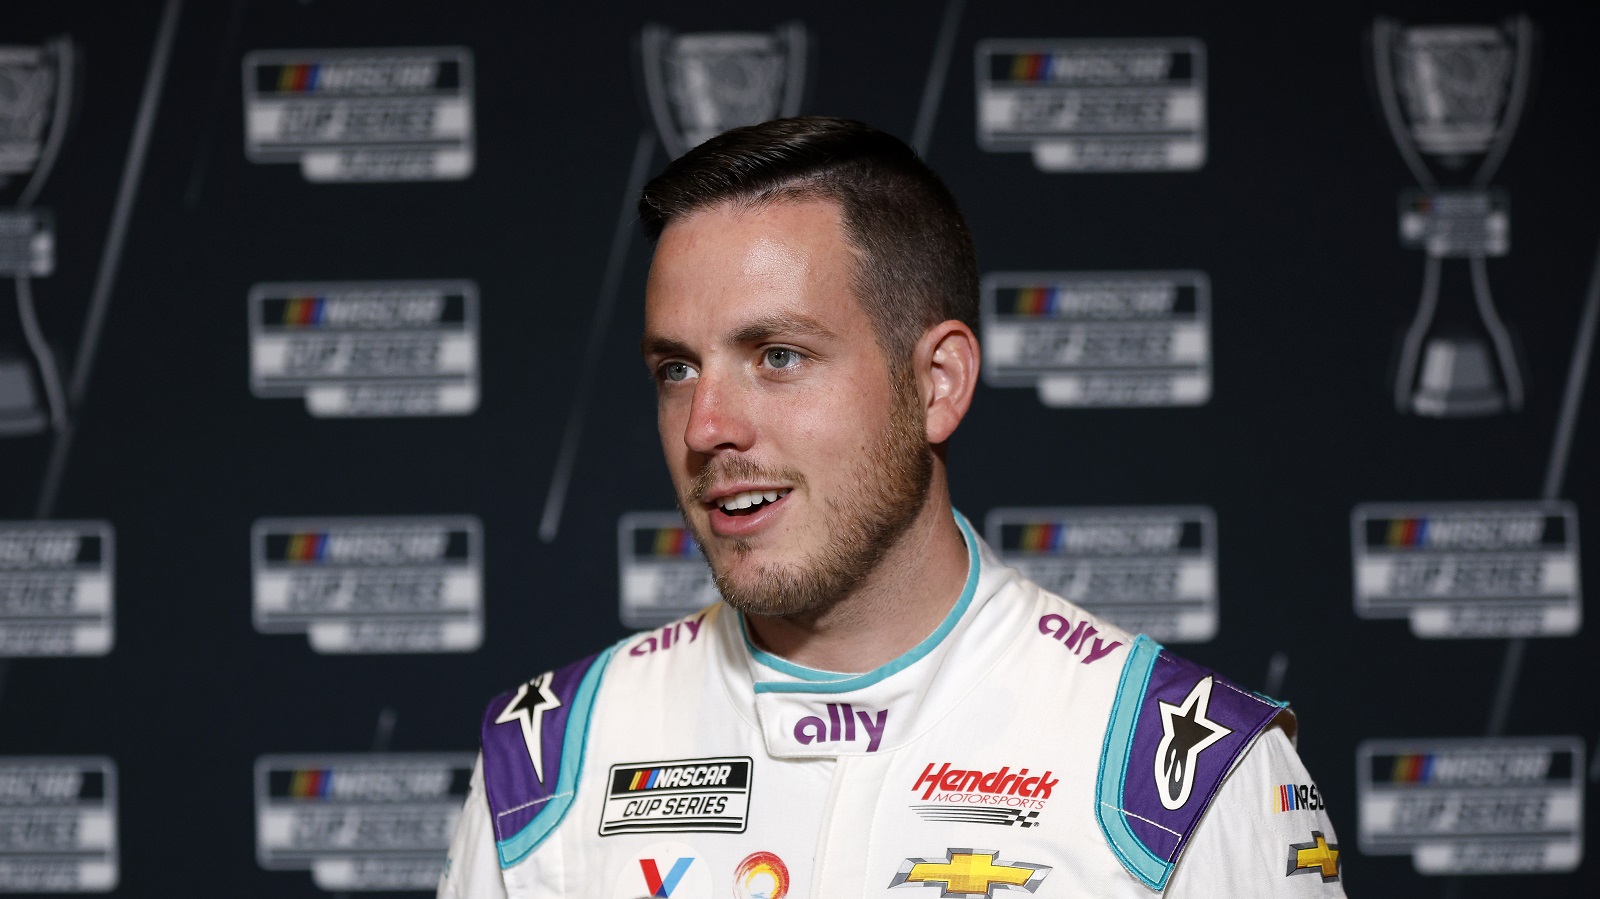 NASCAR driver Alex Bowman speaks with reporters during the NASCAR Cup Series Playoff Media Day at Charlotte Convention Center on Sept. 1, 2022 in Charlotte, North Carolina.